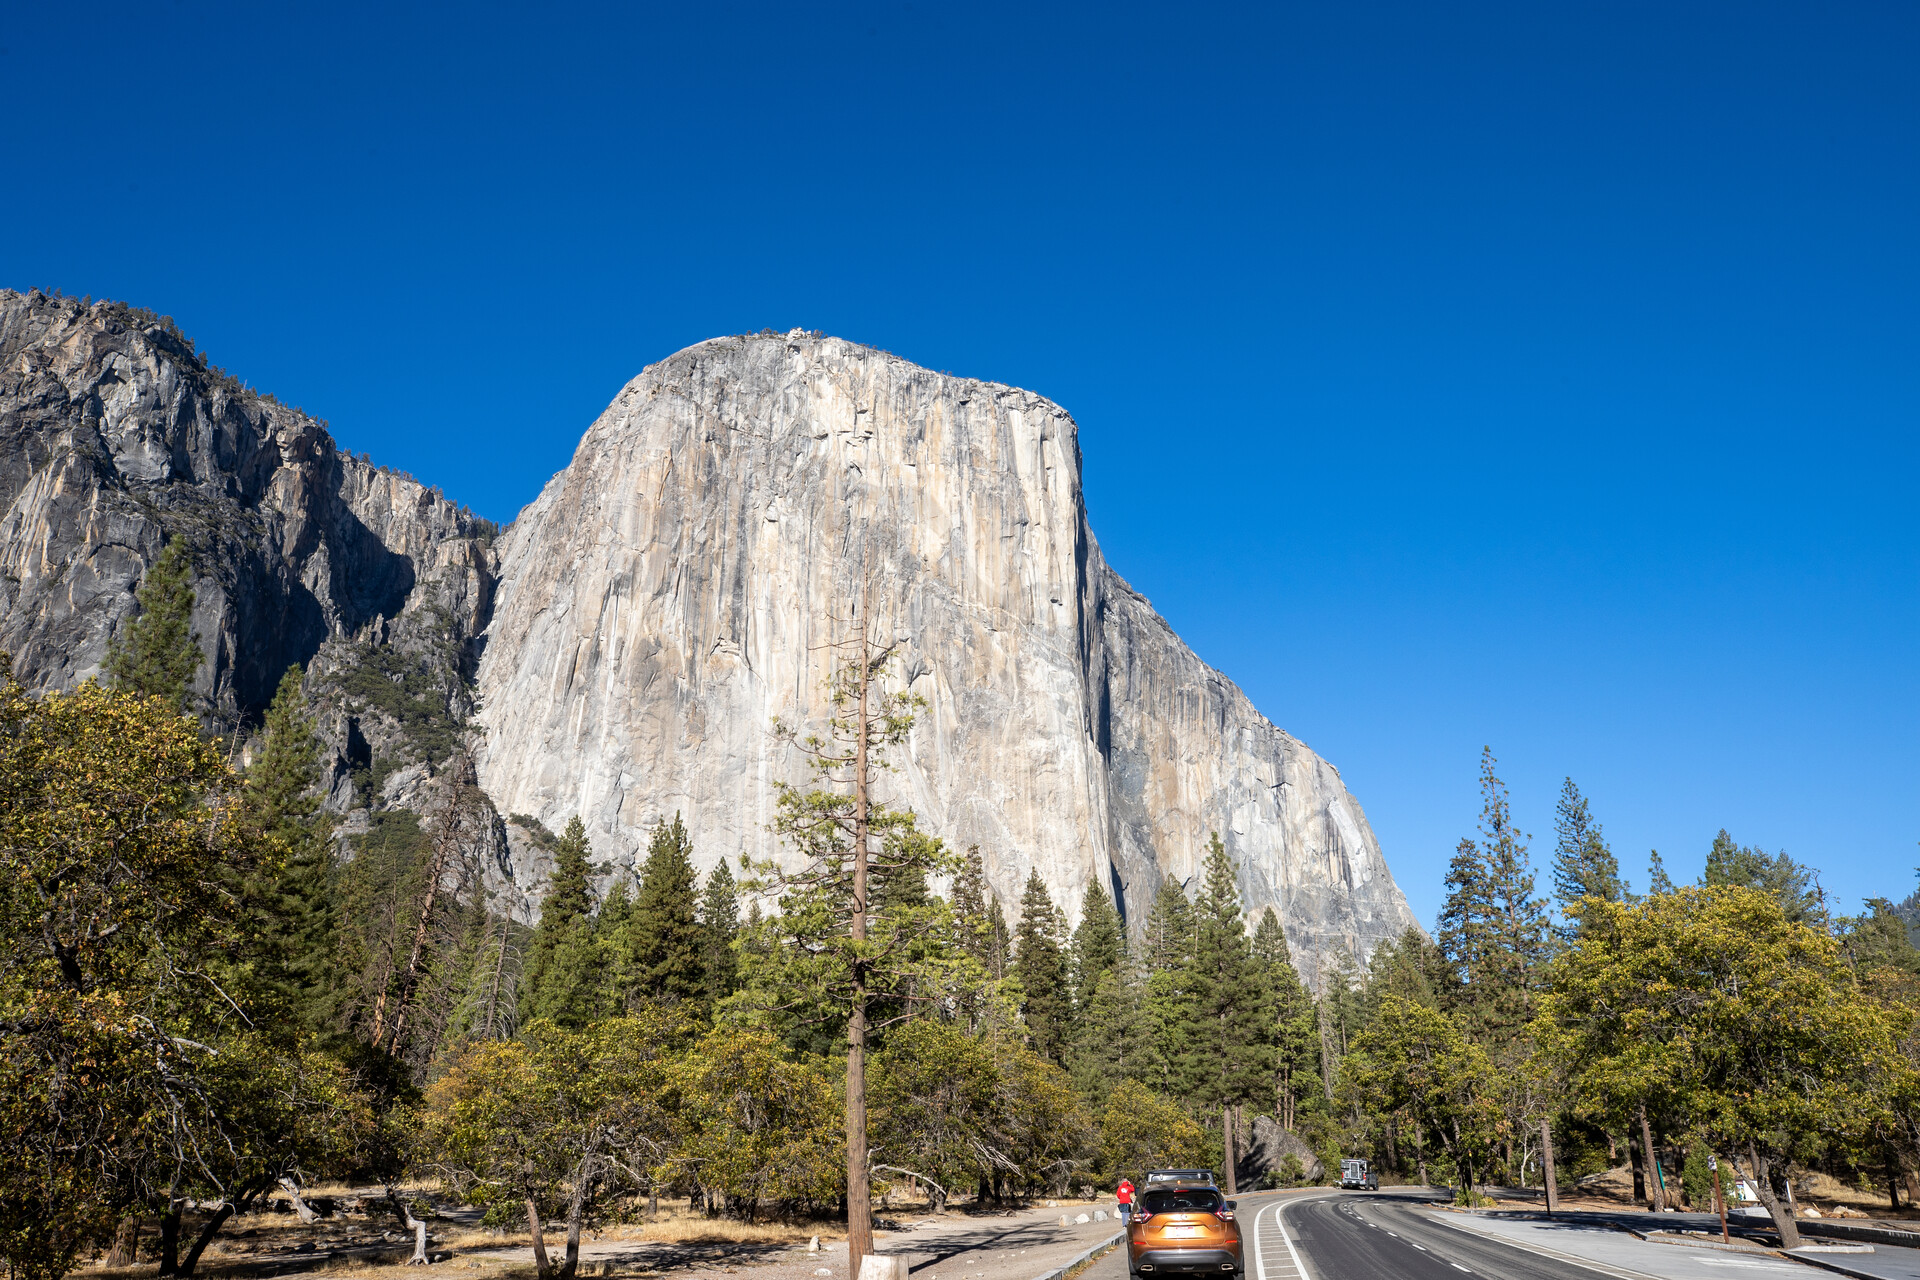 A view of El Capitan in Yosemite, a sheer rock face with a bright blue sky behind it. An orange car drives on the road in the foreground.